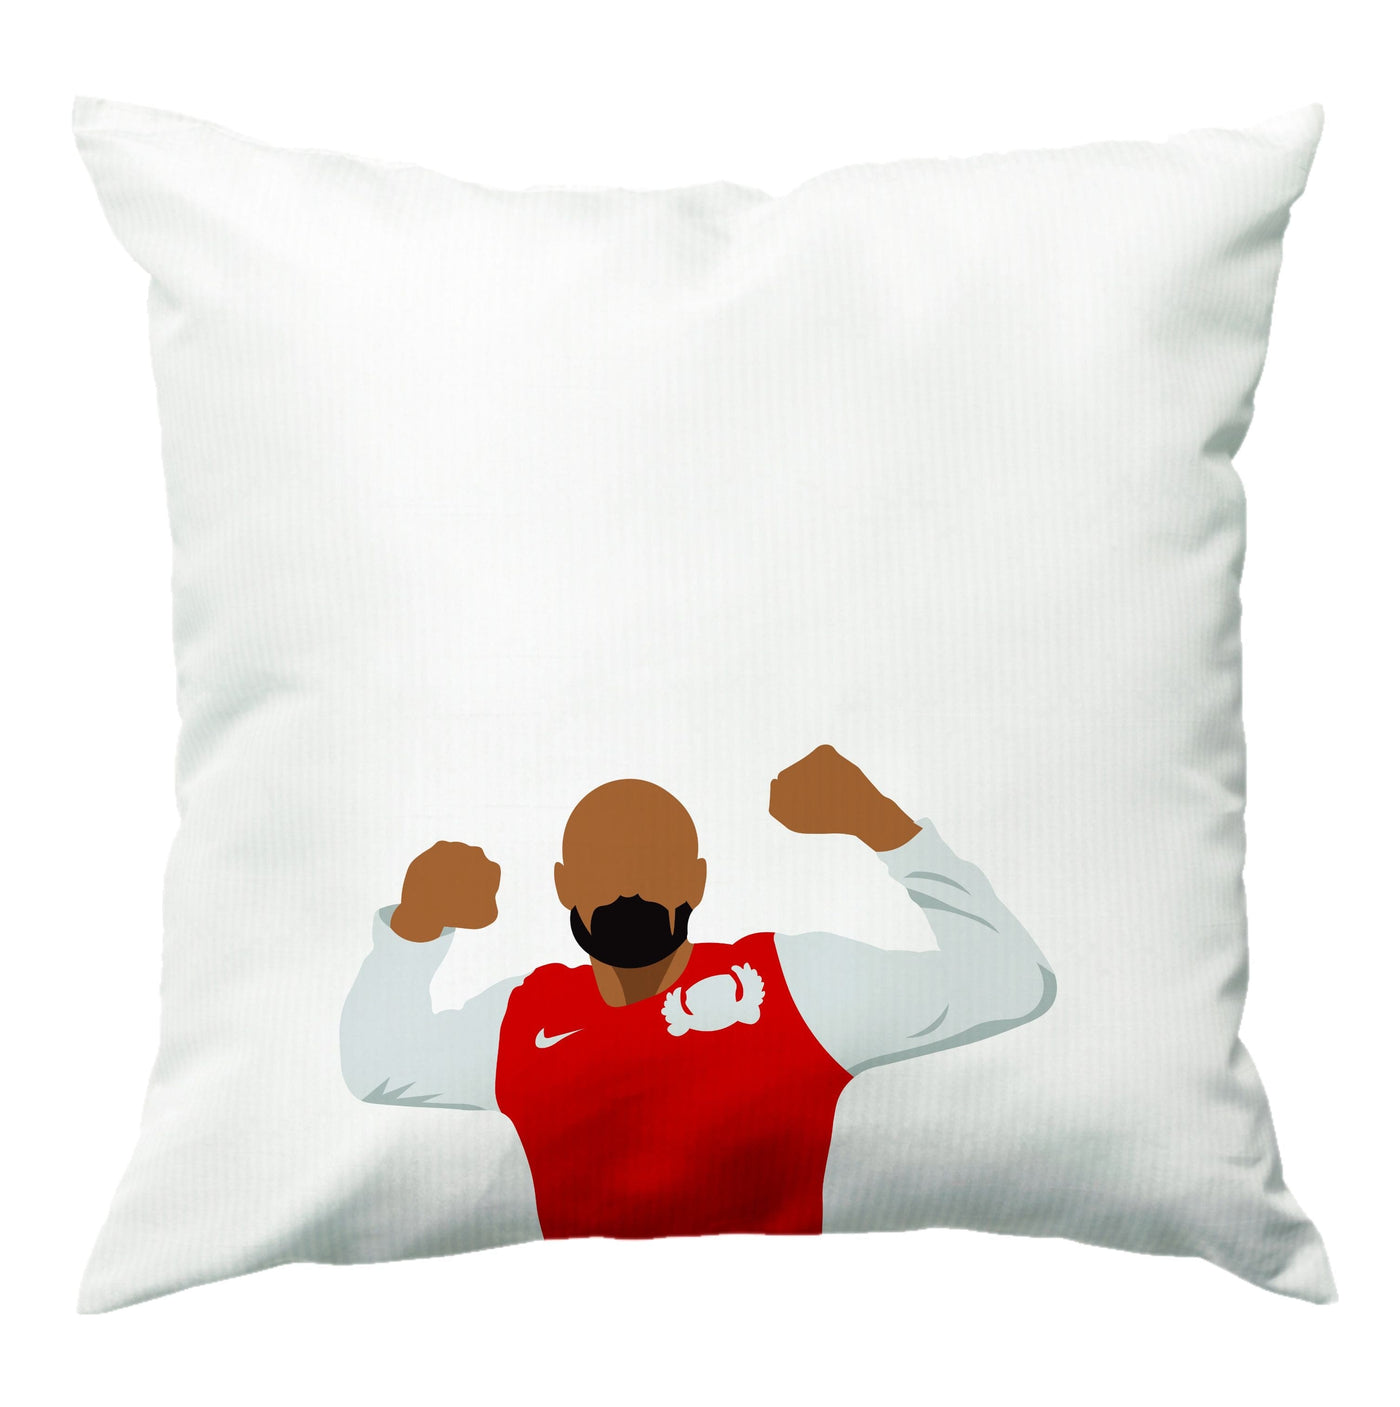 Thierry Henry - Football Cushion